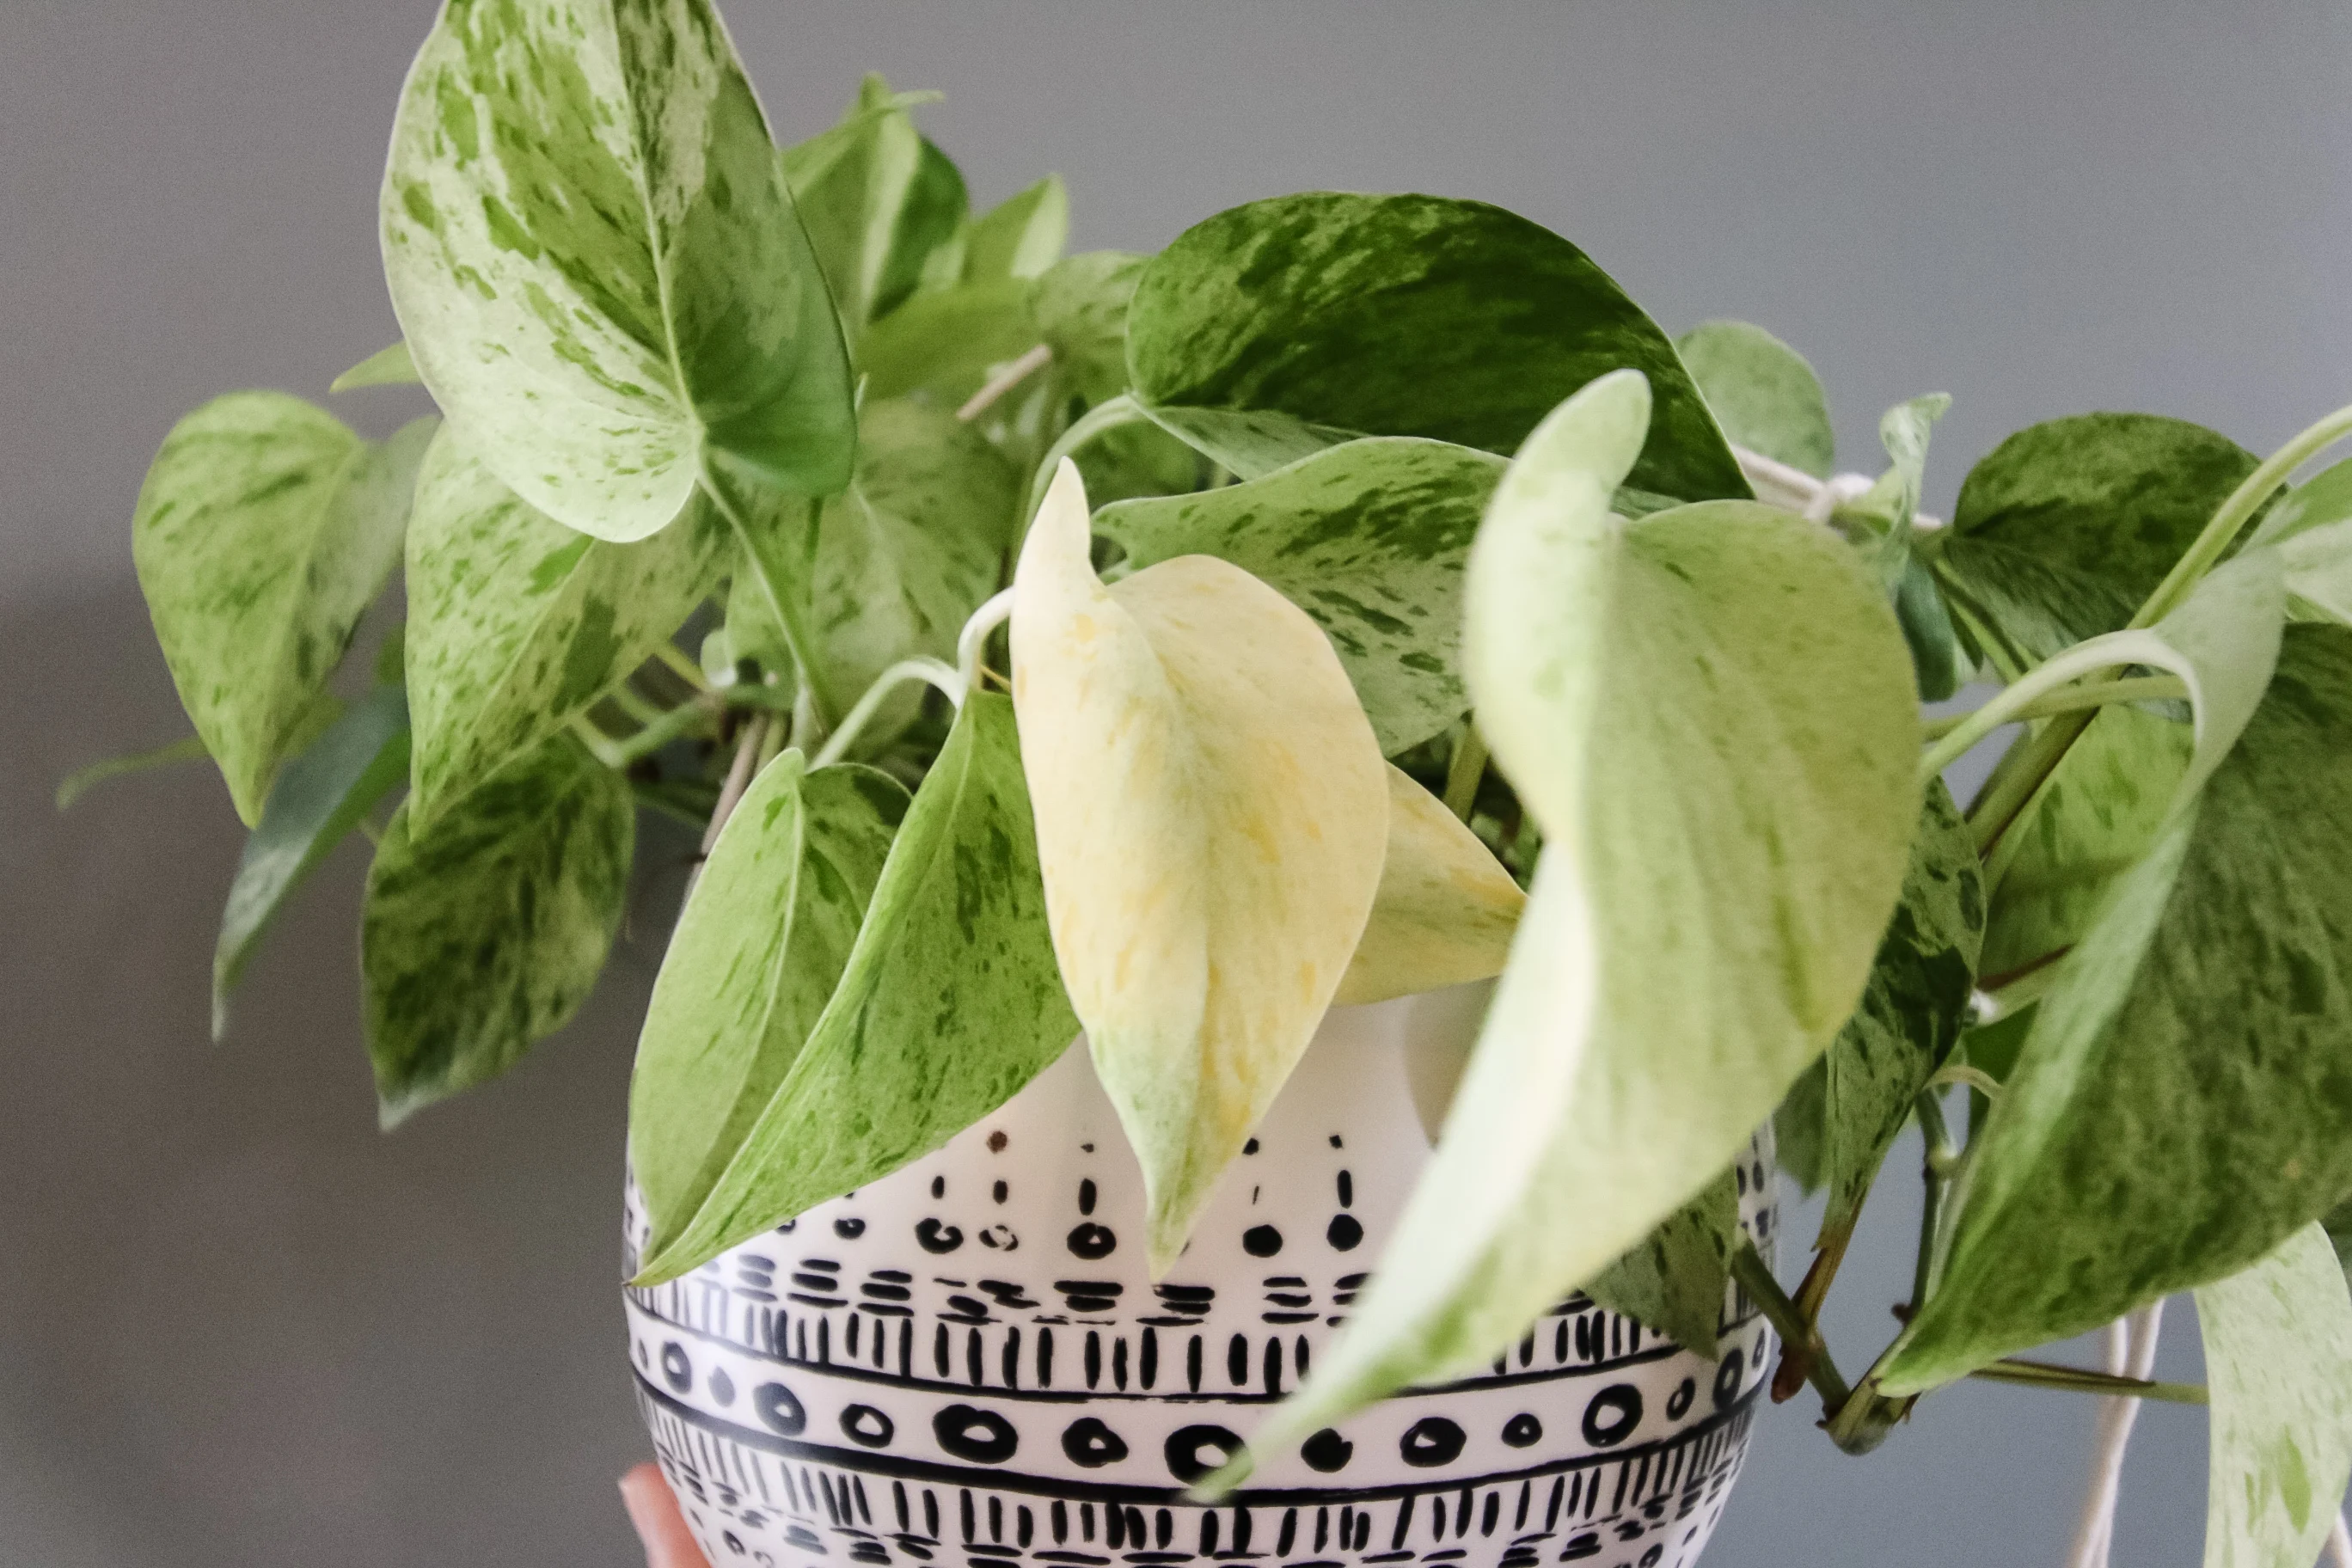 marble queen pothos with a yellow leaf